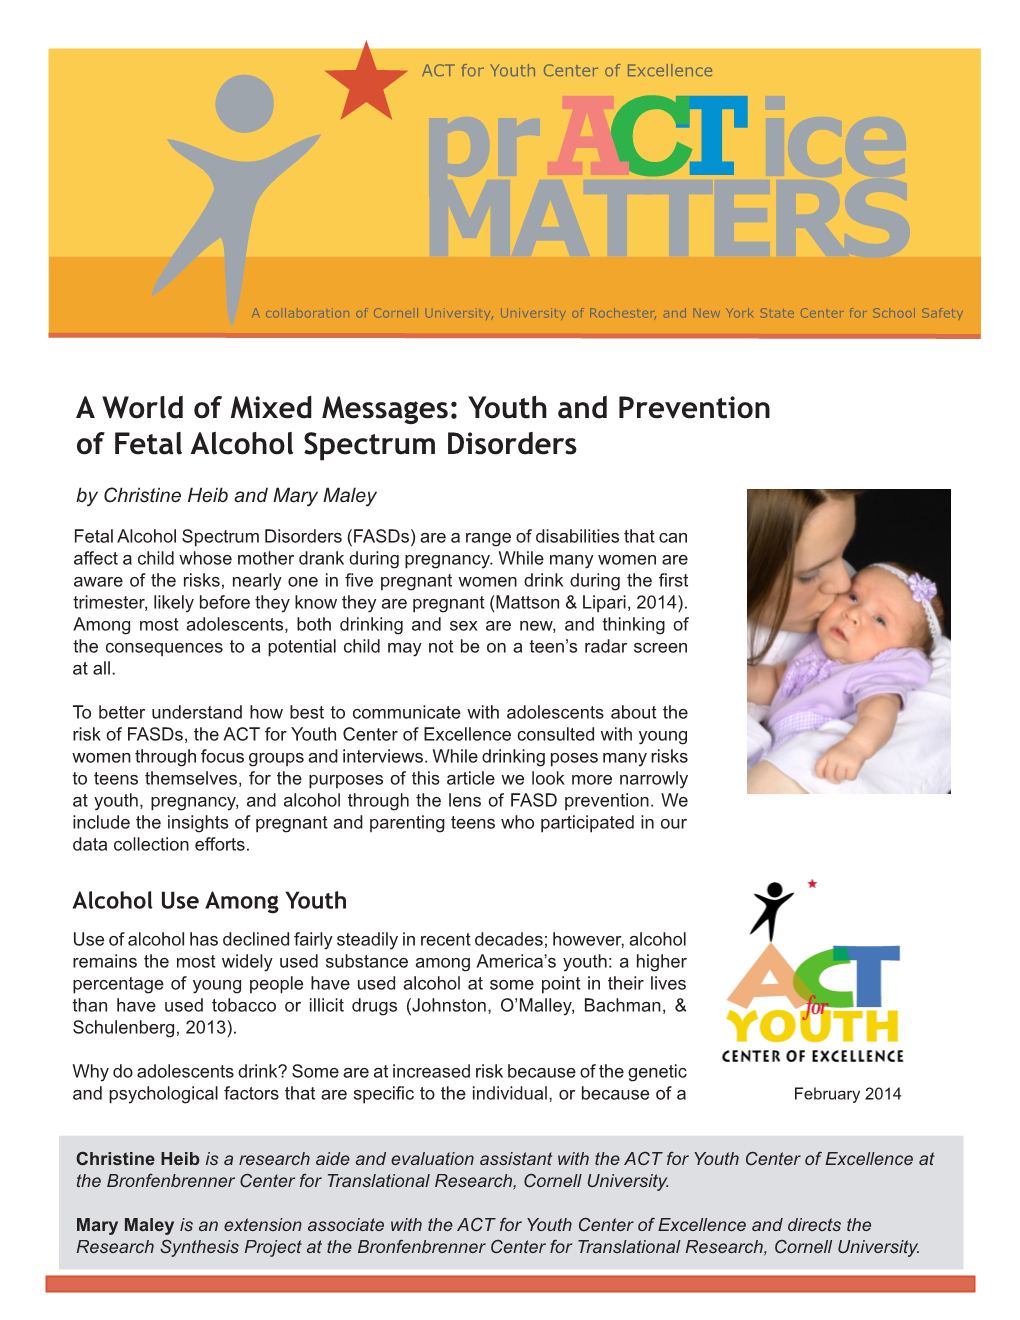 Youth and Prevention of Fetal Alcohol Spectrum Disorders